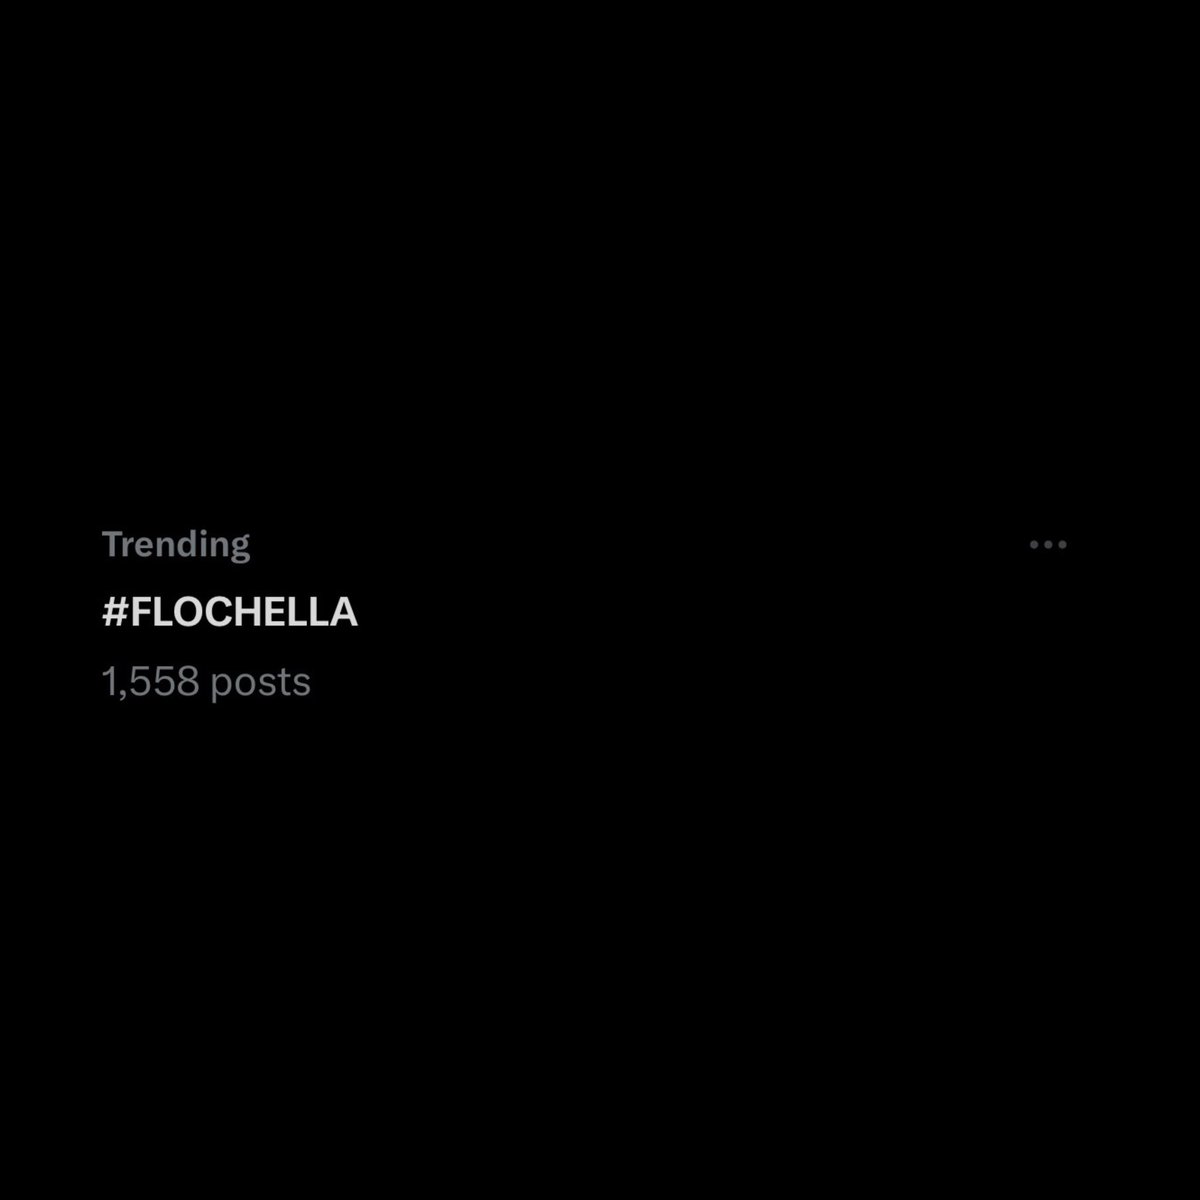 #FLOCHELLA is currently trending on Twitter with over 1,500 tweets.🚨